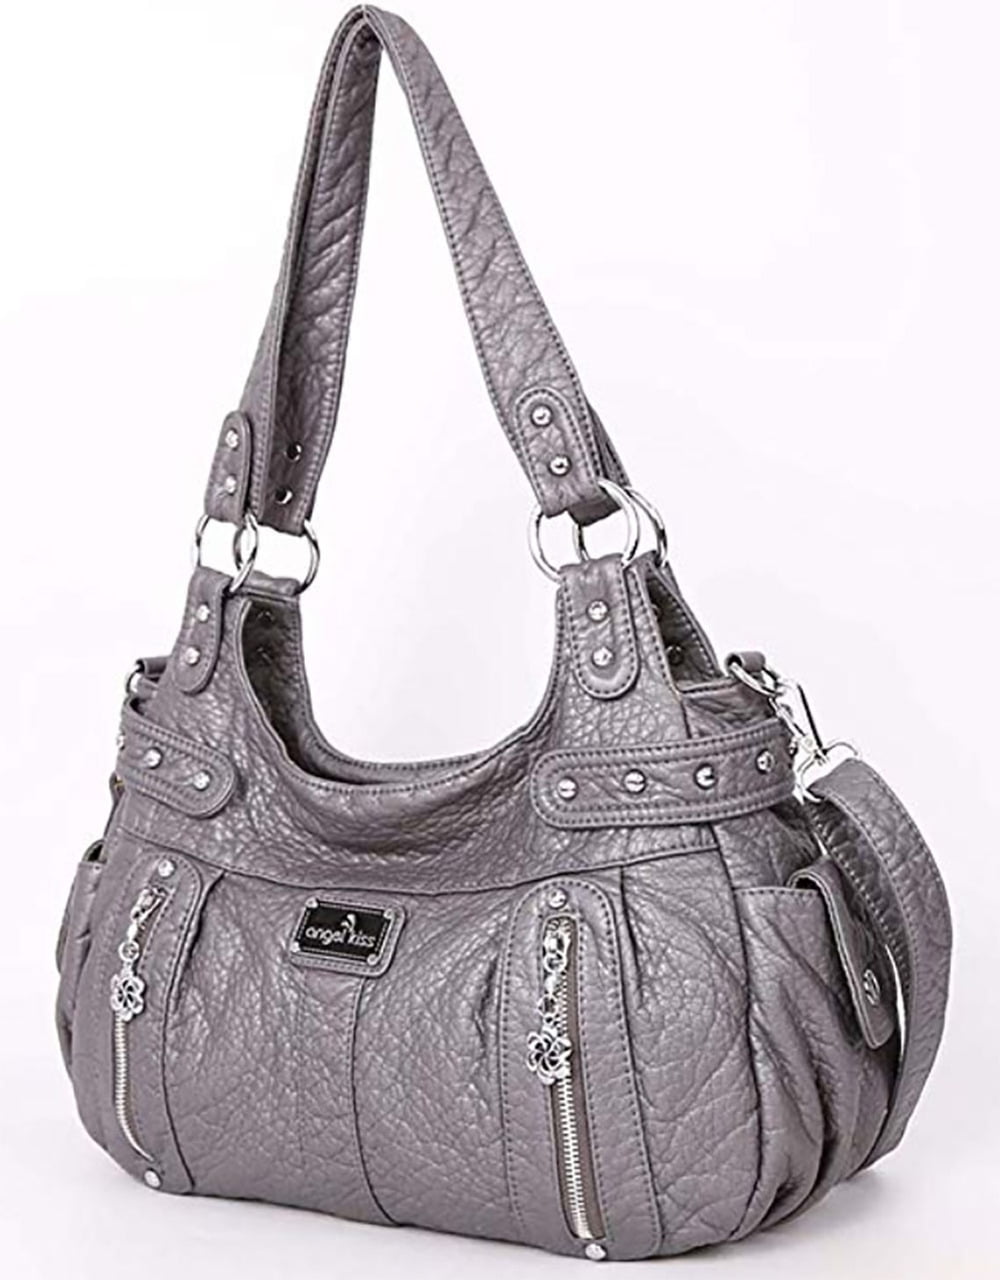 Zzfab - Double Compartments Washed Leather Purse Soft Leather Shoulder Bag Crossbody Bag Grey ...